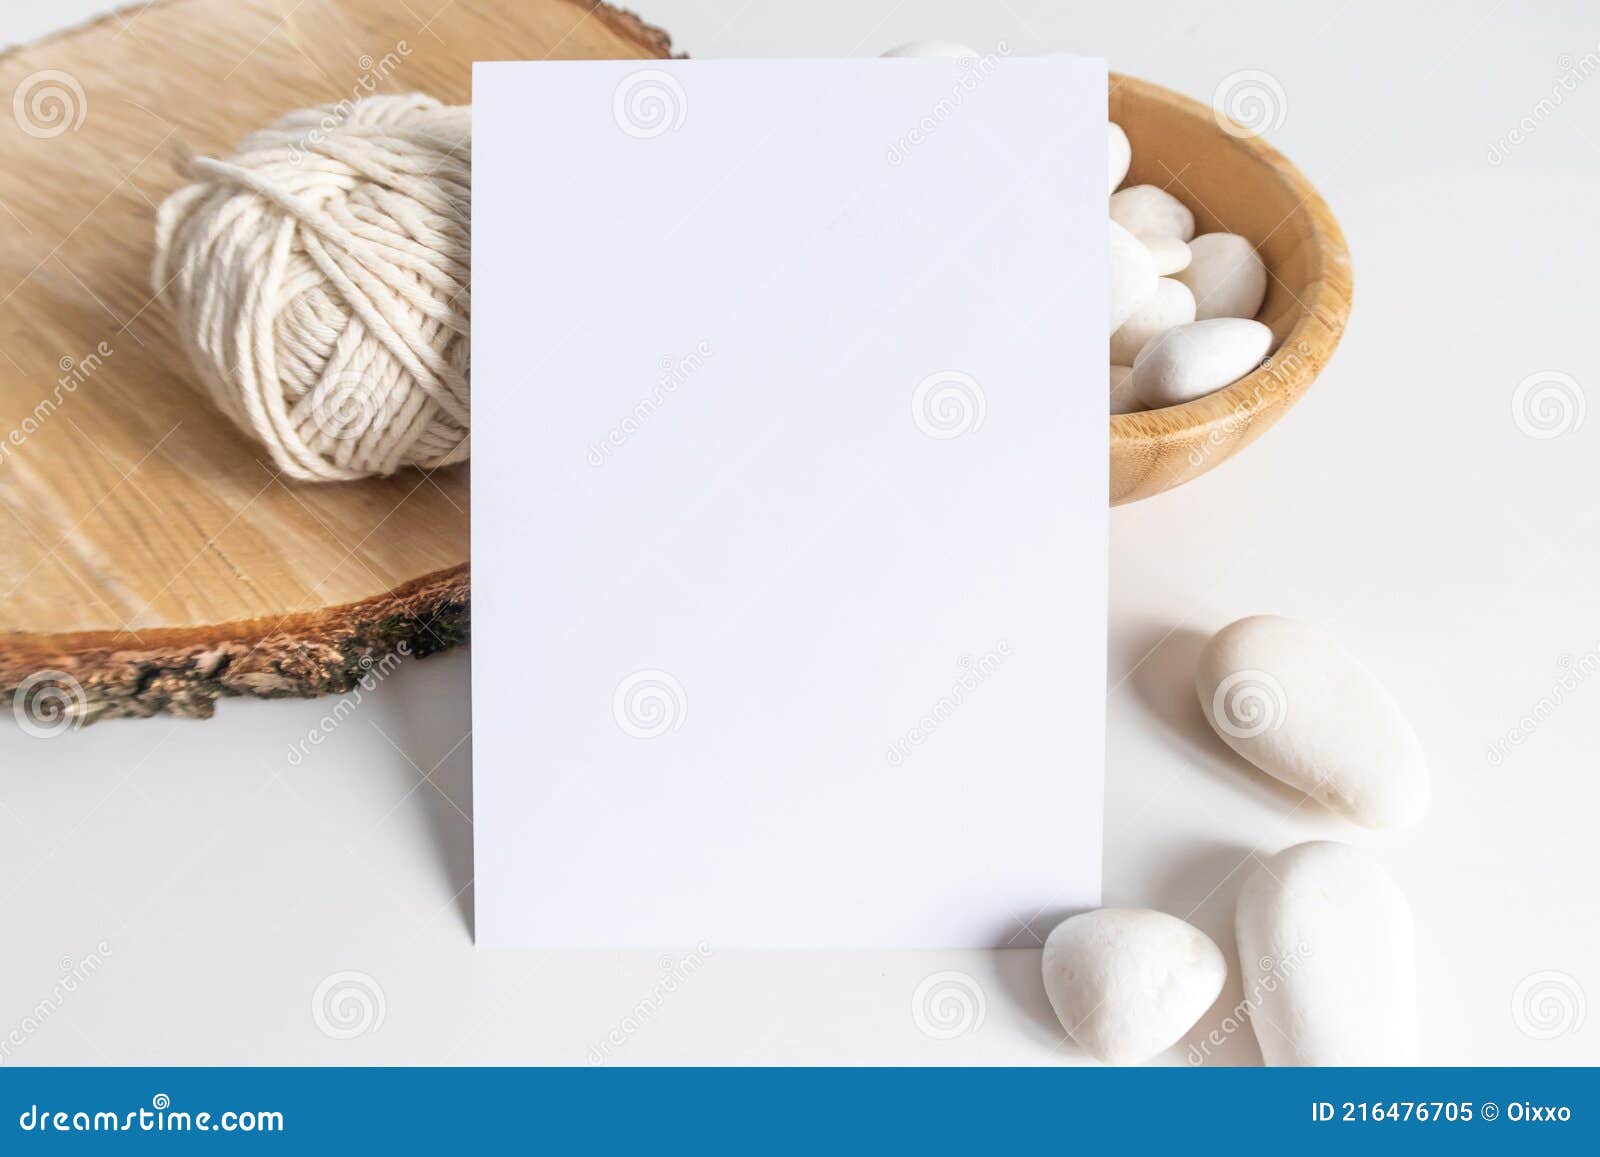 Download 871 Mockup Postcard Vertical Photos Free Royalty Free Stock Photos From Dreamstime